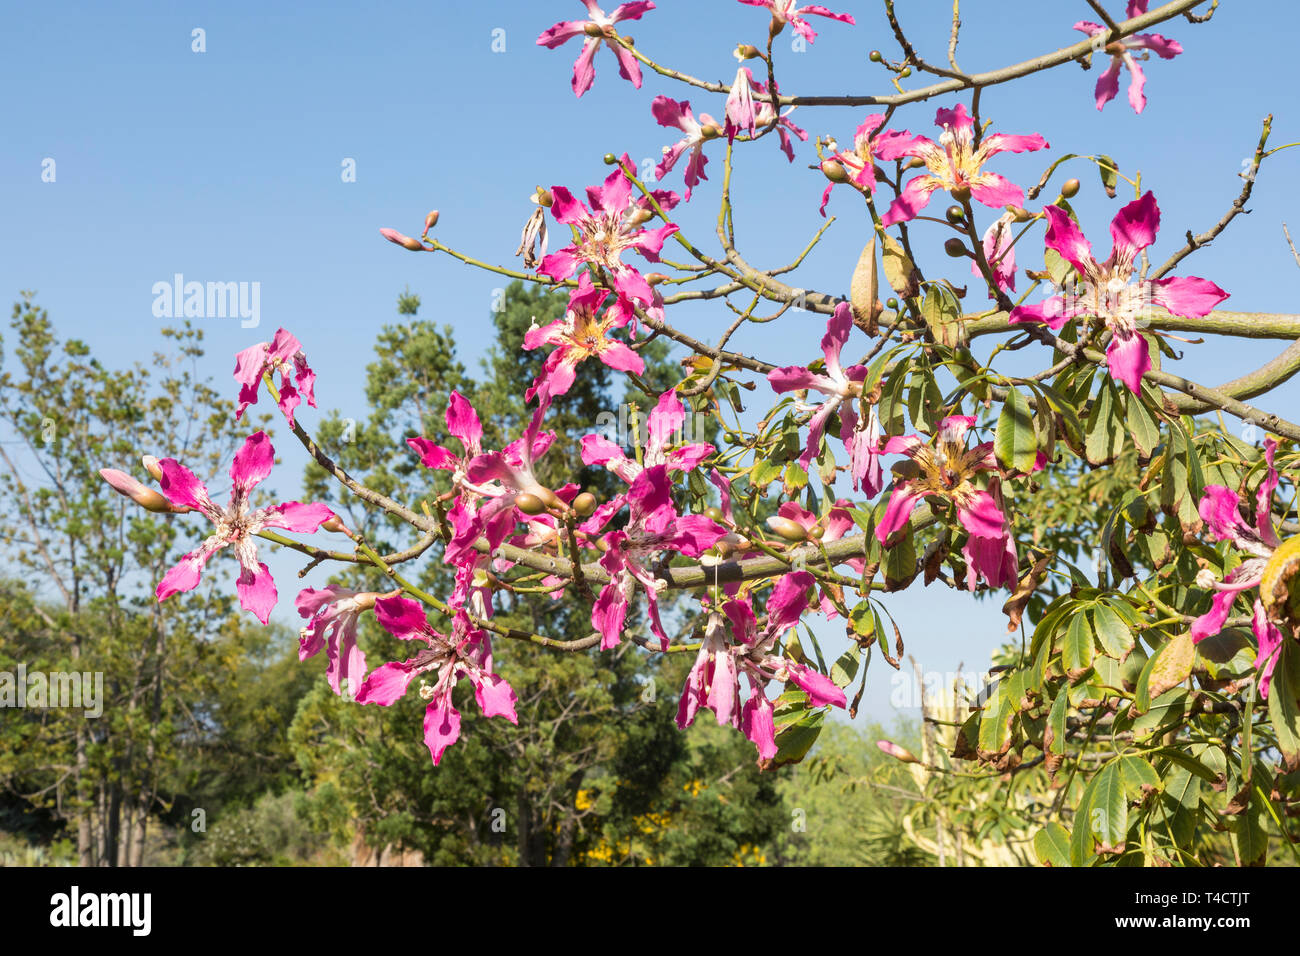 Pink flowers of Chorisia speciosa, or Kapok Tree, native to subtropical South American forests, summer blooming, thorny trunk and branches, deciduous, Stock Photo